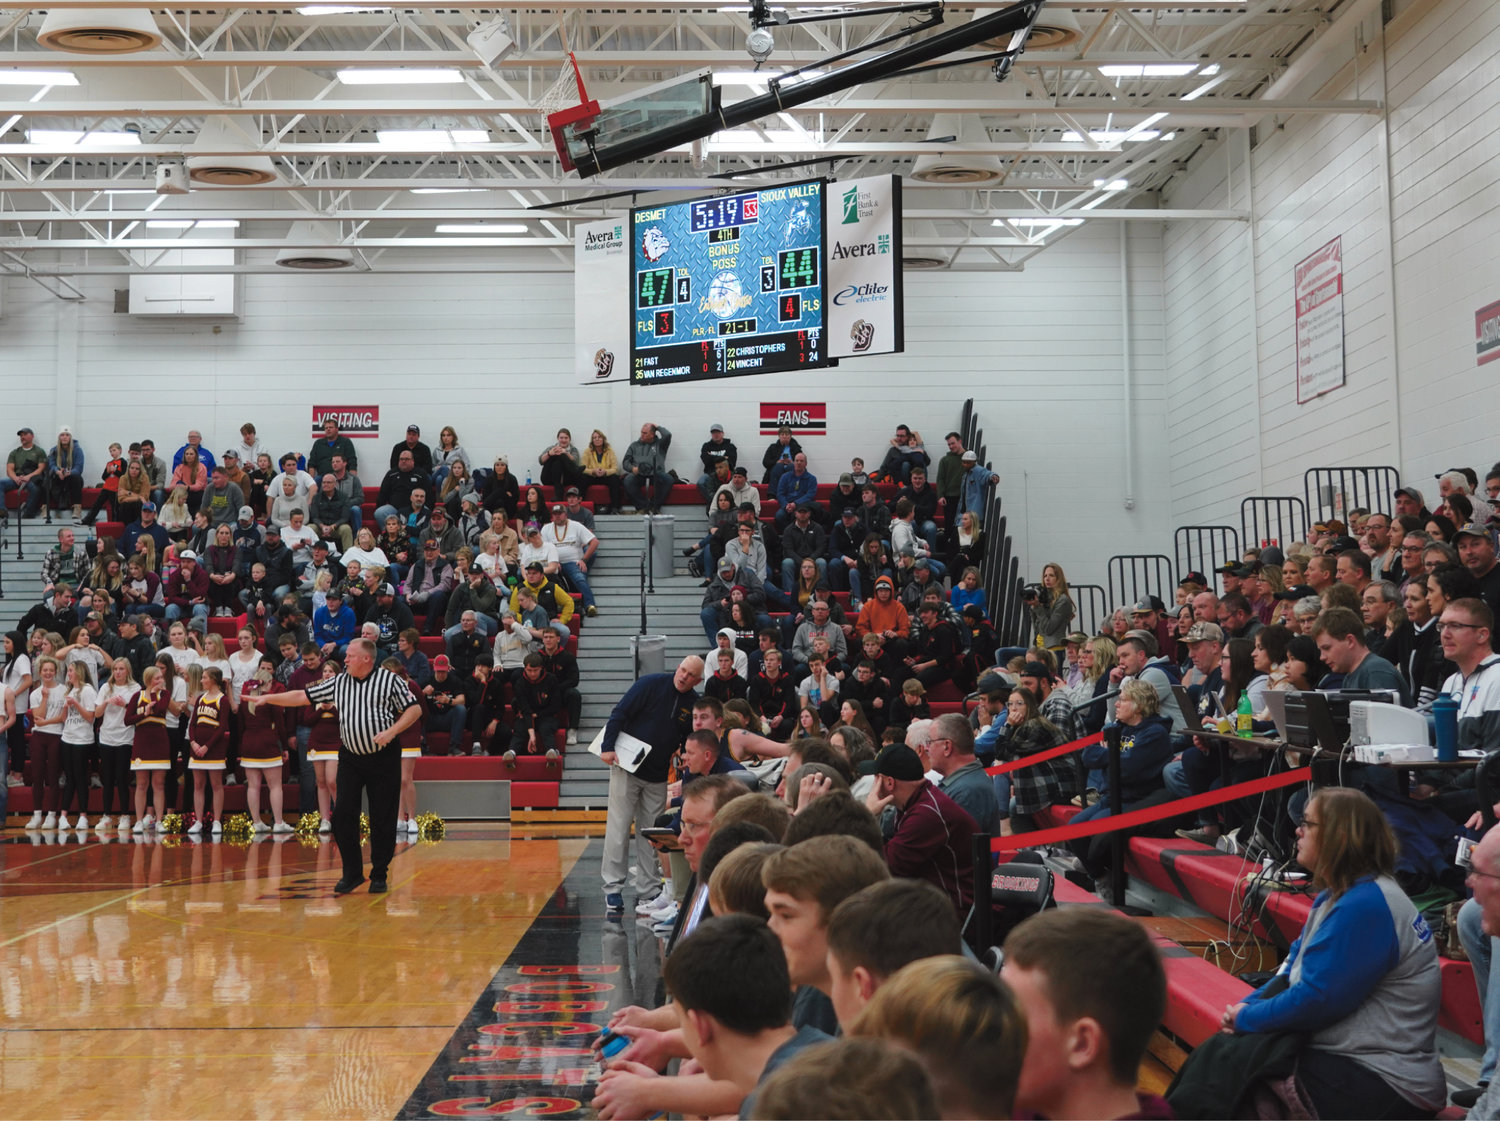 The gym was packed in Brookings for the last South Dakota high school basketball game of 2021, featuring a showdown between Class A #1 Sioux Valley and Class B #1 De Smet. De Smet outlasted Sioux Valley in a hard-fought battle, winning 55-47. More on the game, page 24.